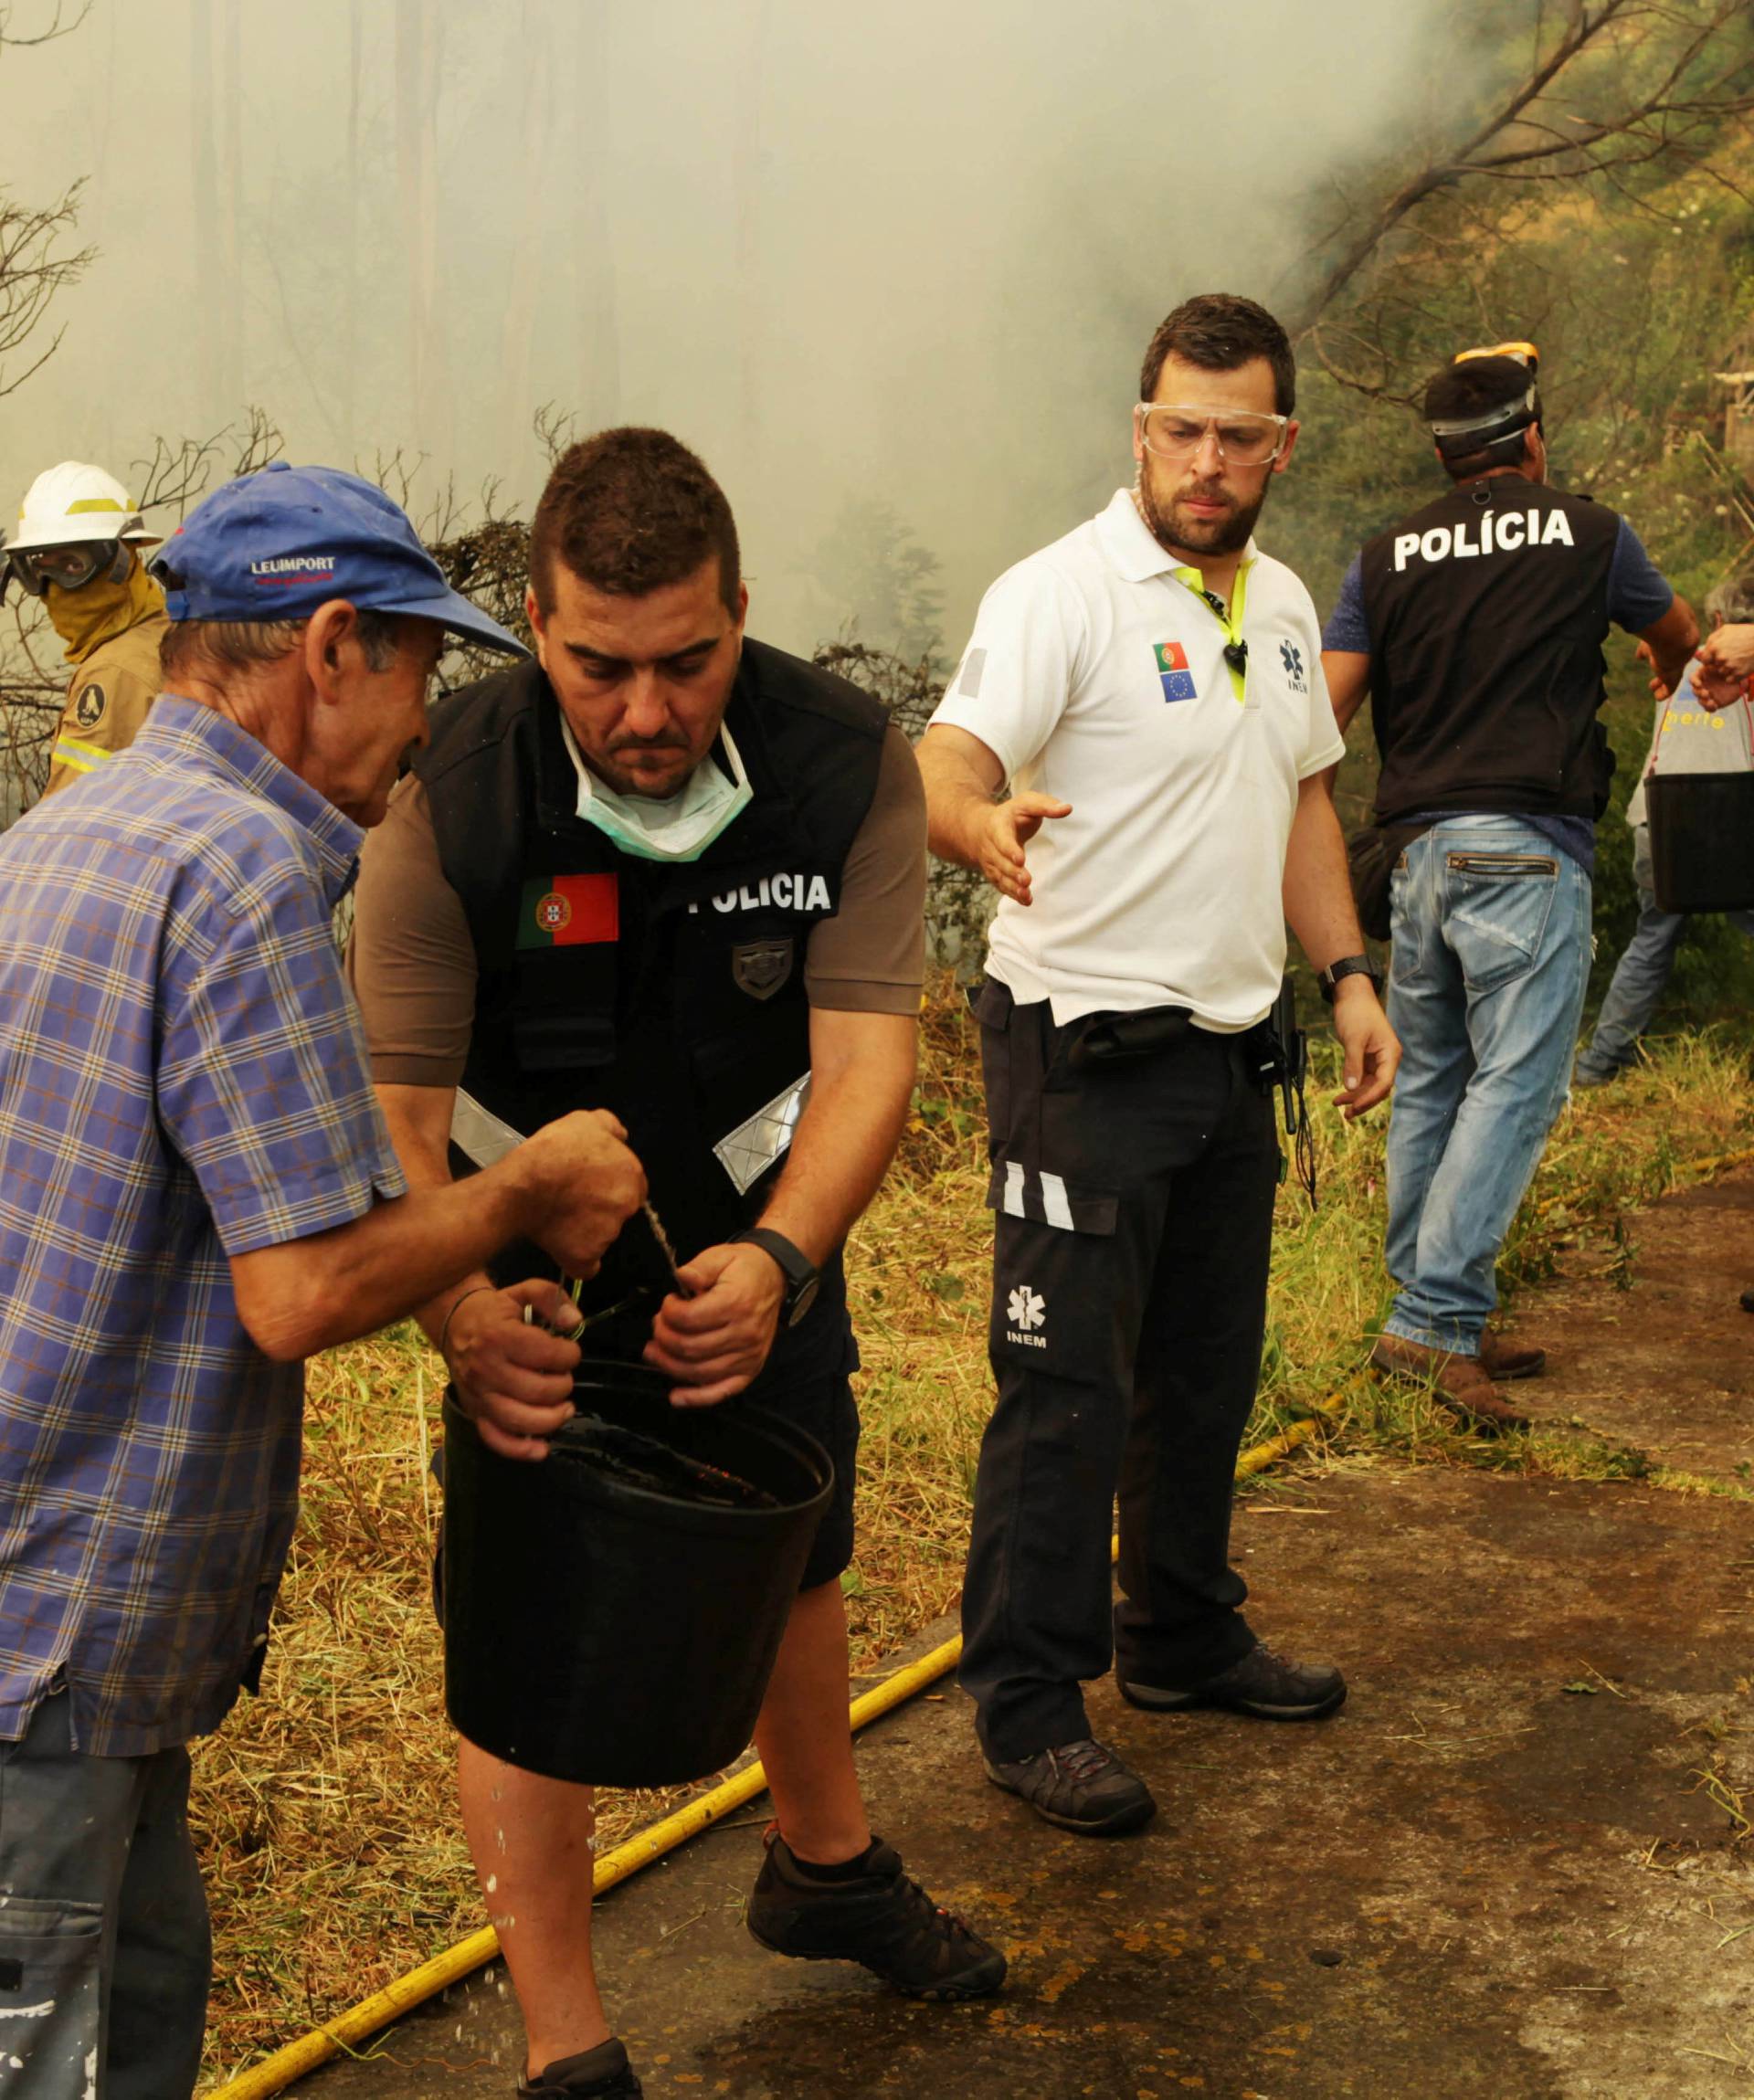 Civilians, and police officers pass water buckets to help extinguish a forest fire near houses at Sao Joao Latrao, Funchal, Madeira island